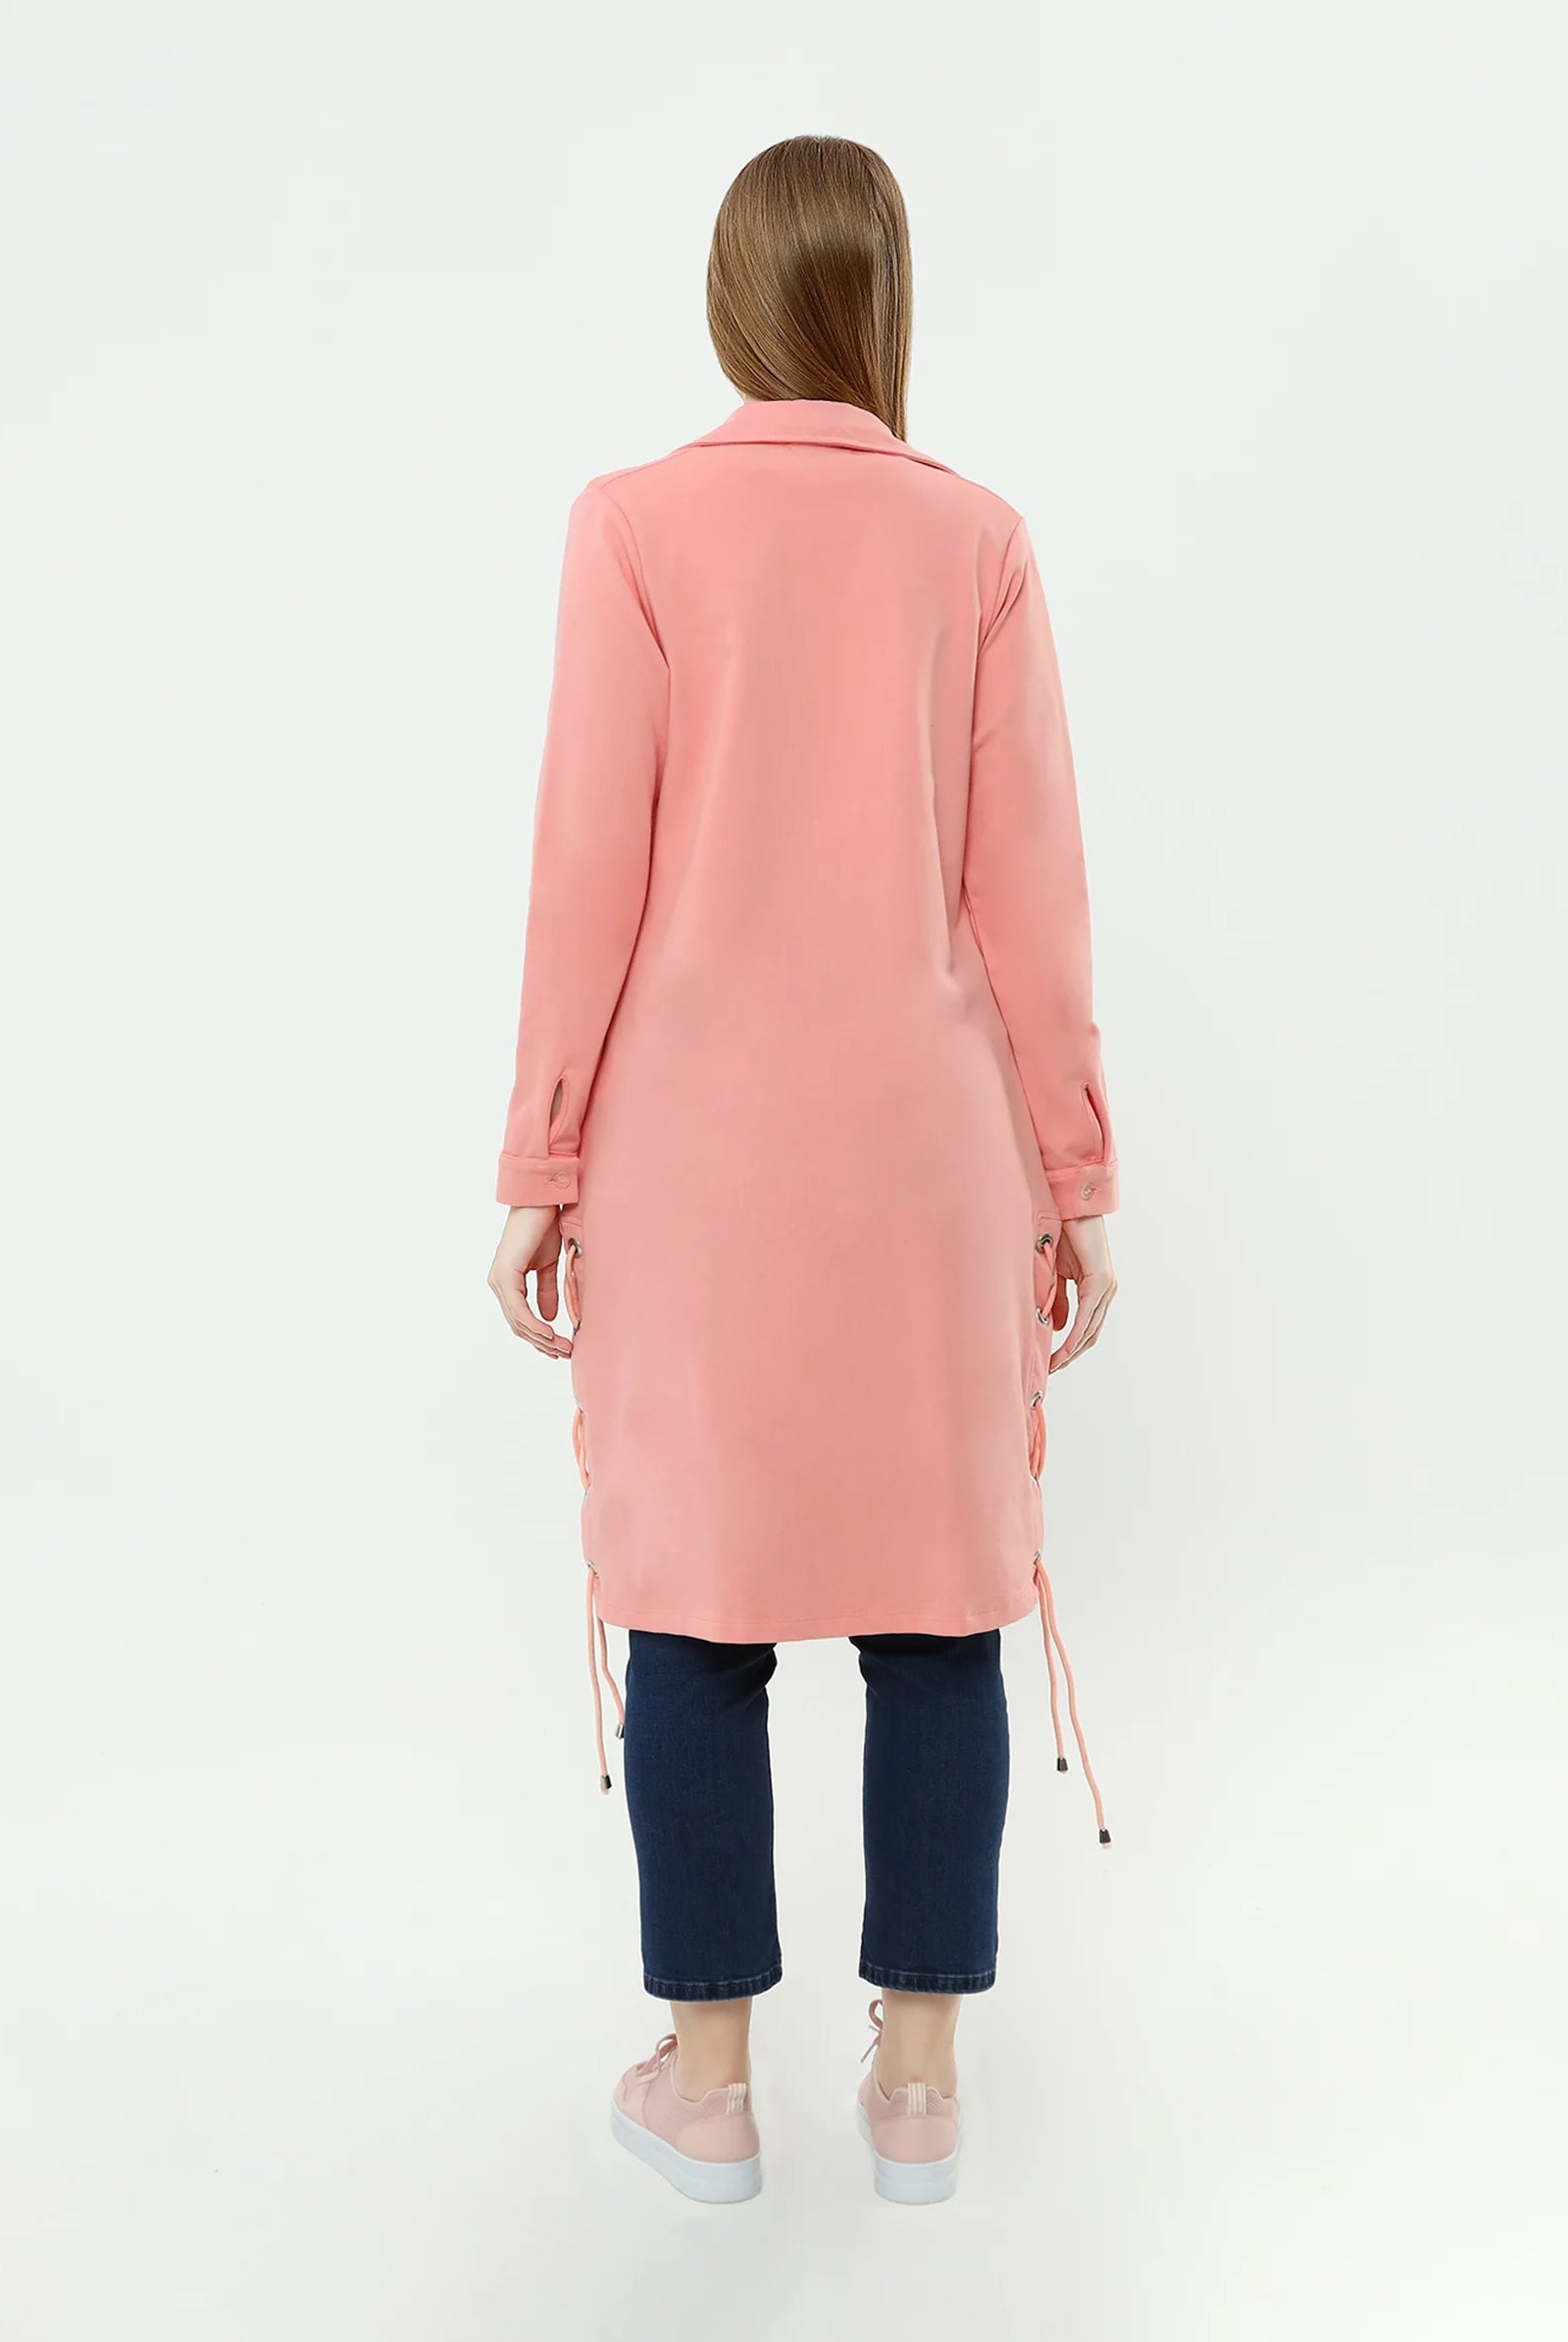 peach pink jackets for women